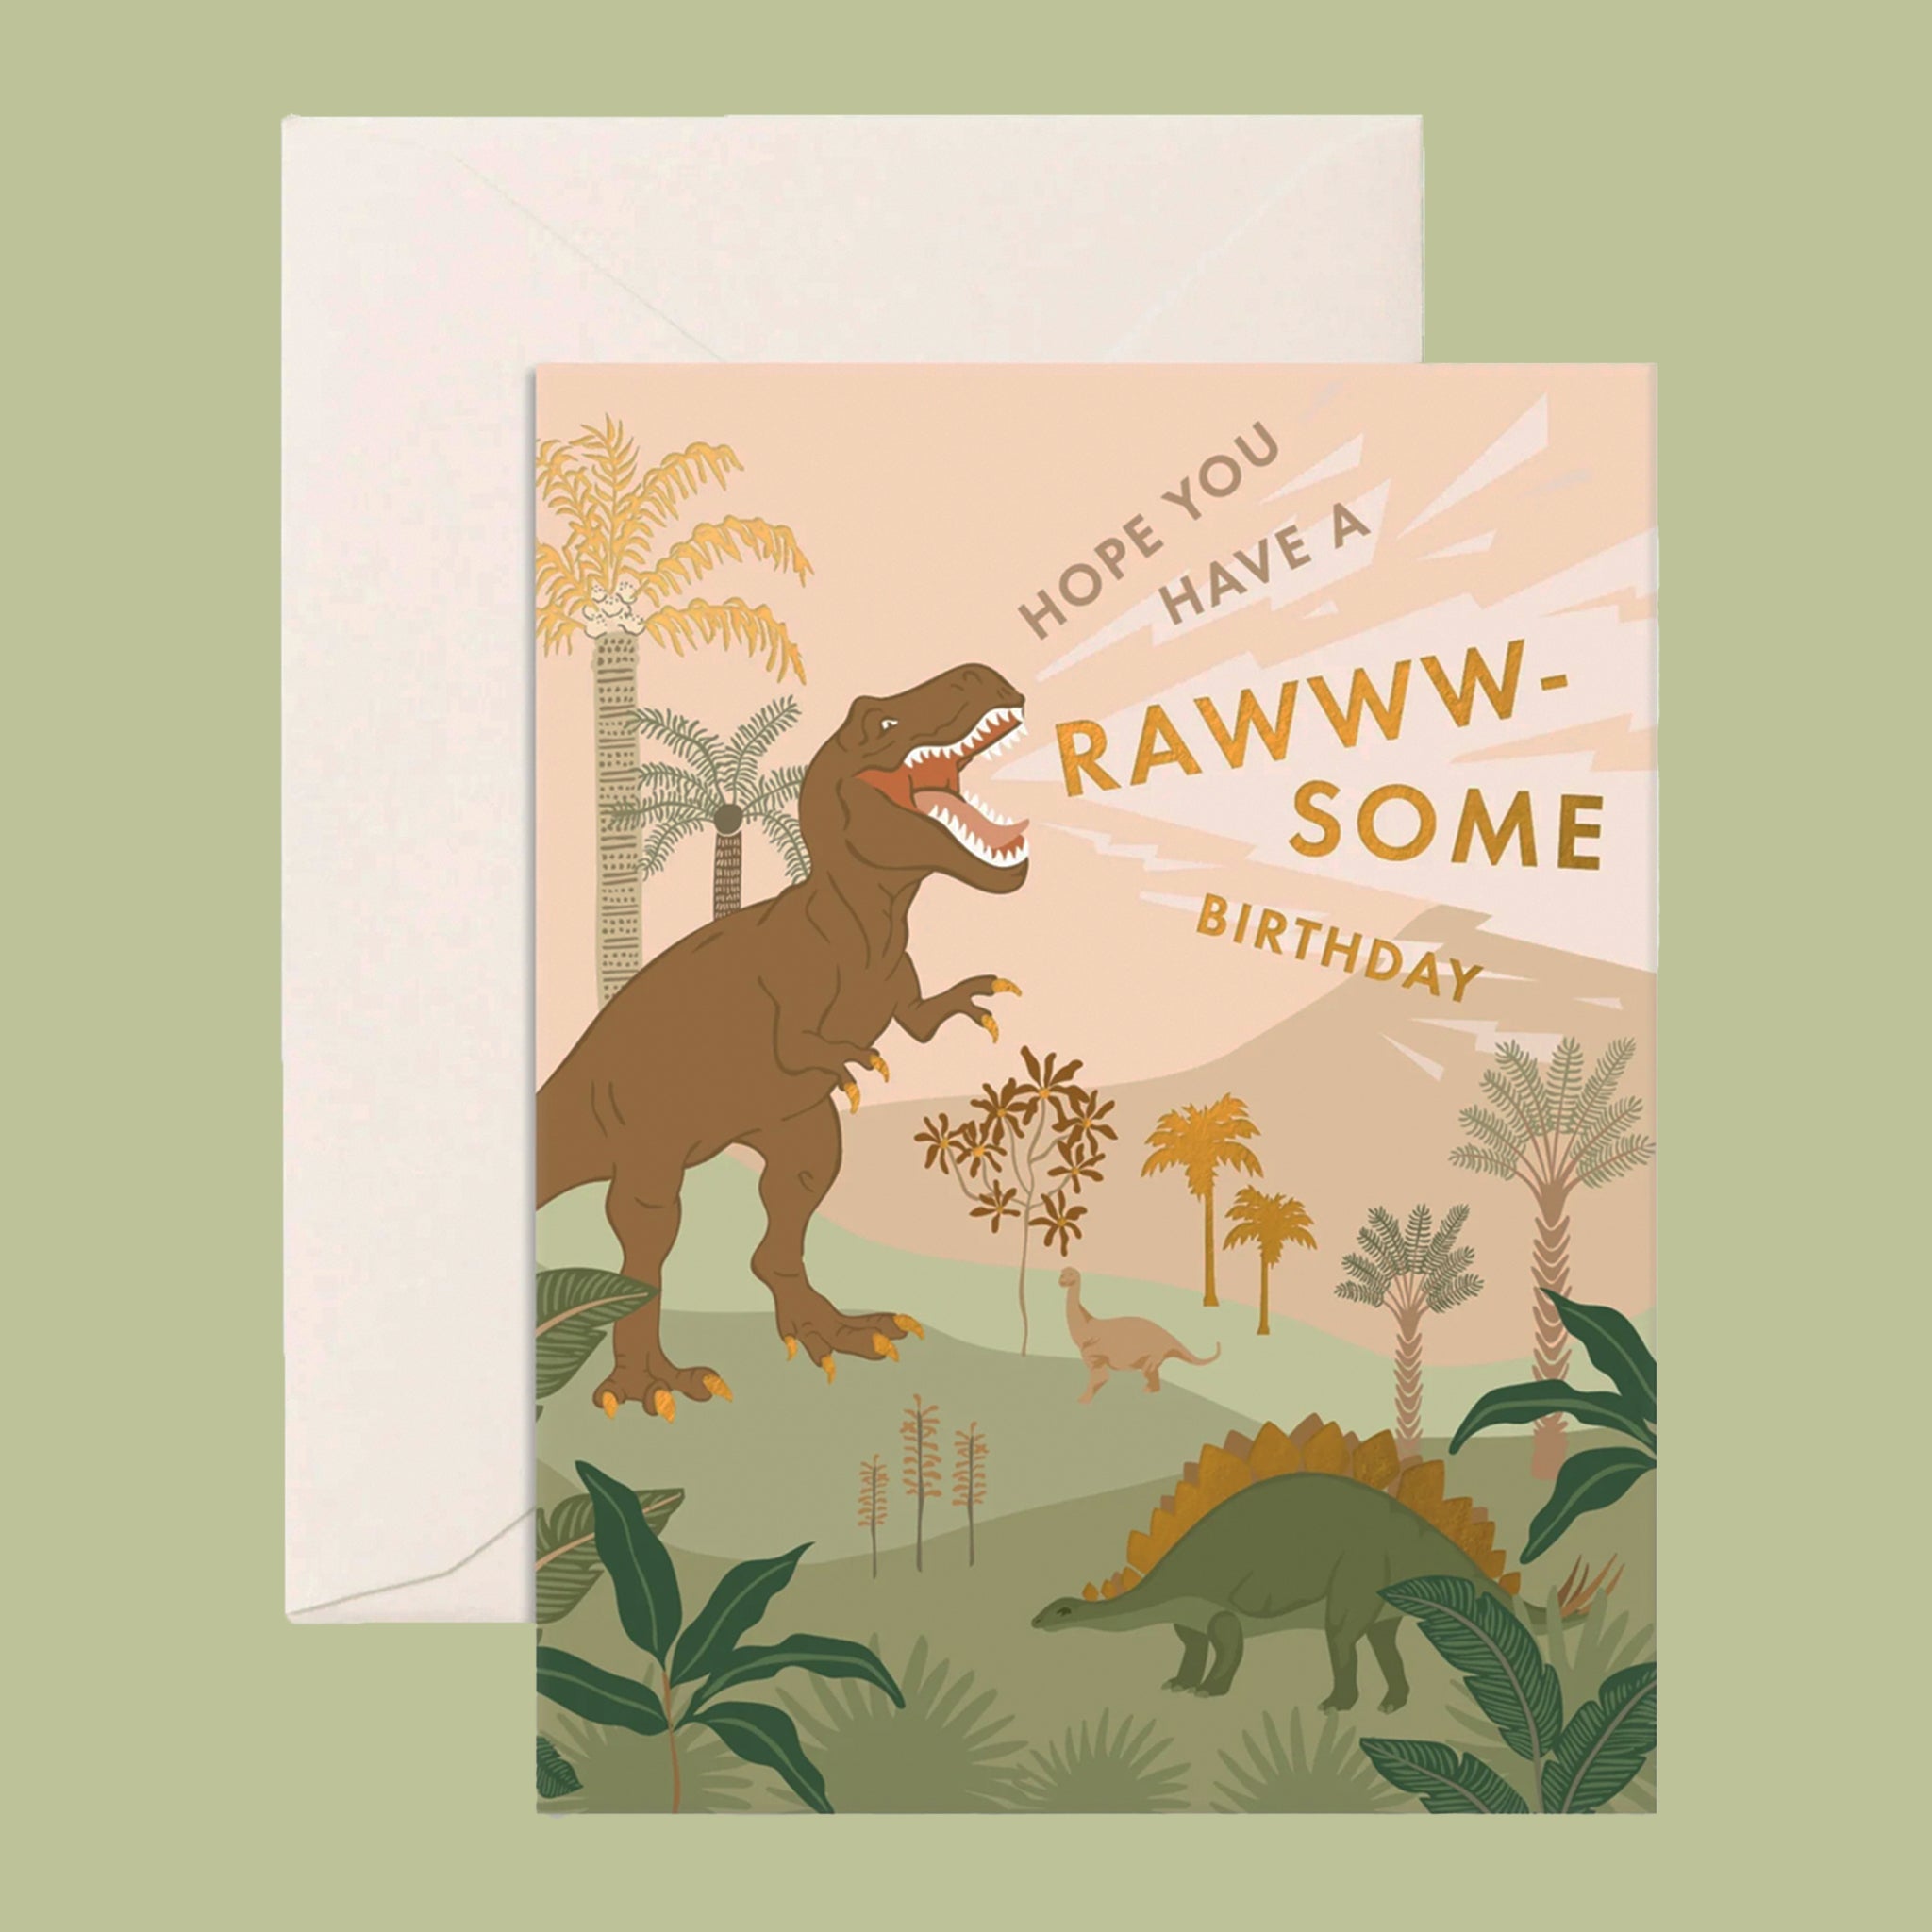 On a green background is a birthday card with a graphic of dinosaurs in a tropical landscape with gold foiled text that reads, &quot;Hope You Have A Rawww-Some Birthday&quot;.